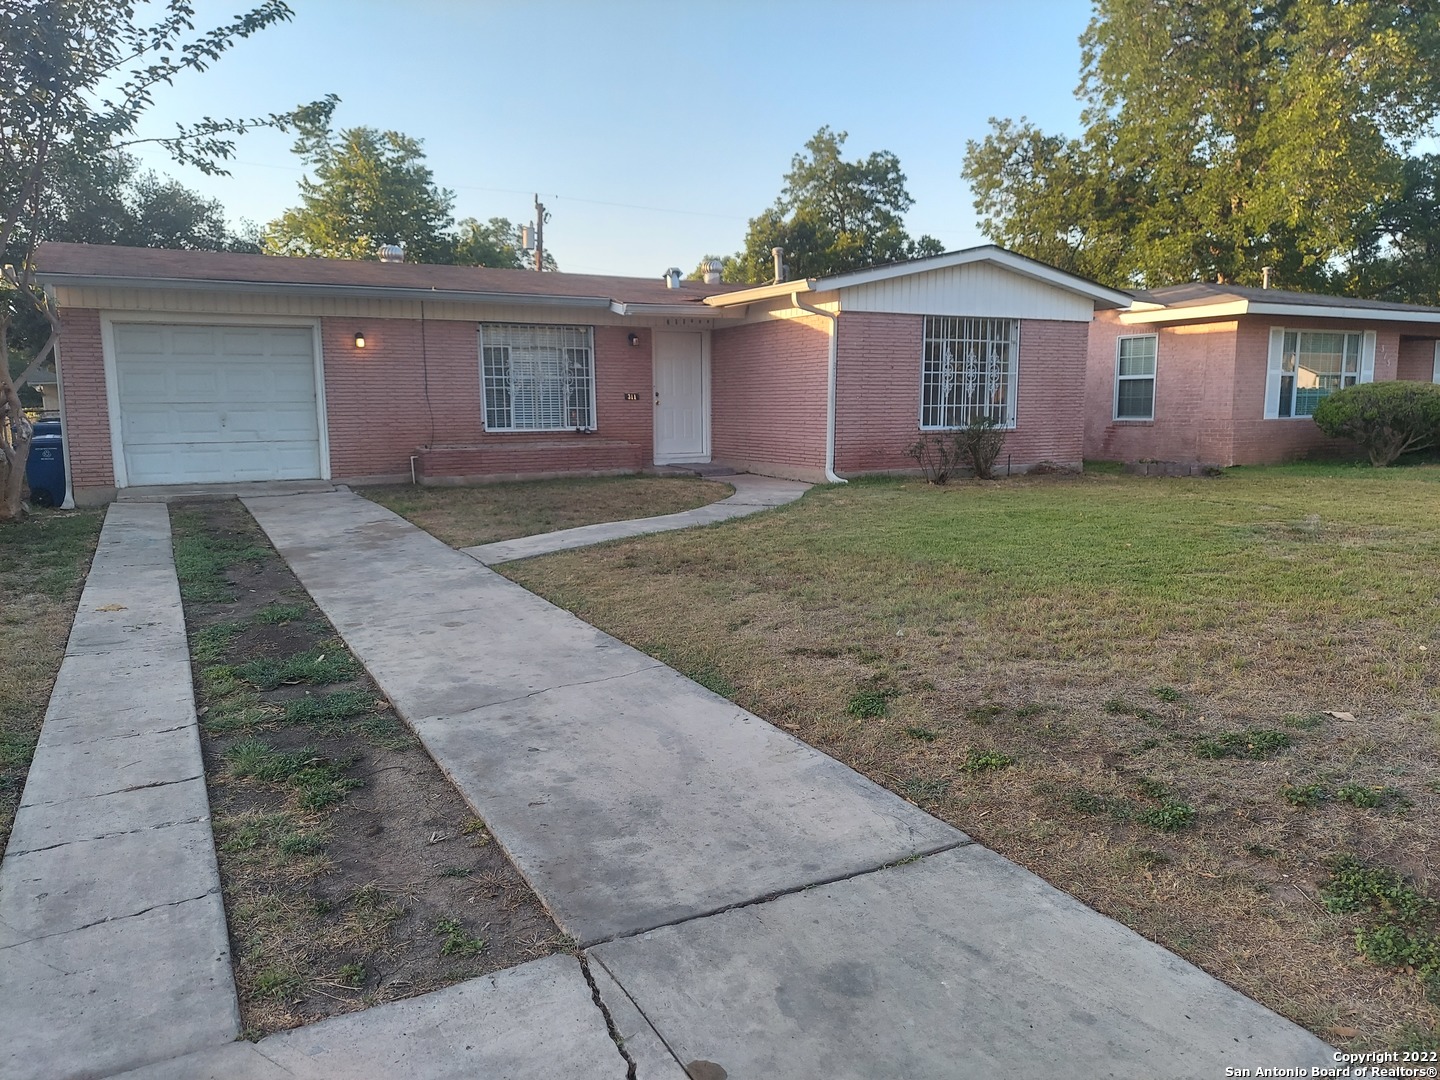 *DEADLINE FOR FINAL AND BEST OFFER IS FRIDAY JUNE 3RD AT 5PM* 1 Owner home with 3/2/1, close to the AT&T Center, updates include new carpeting w/wood floors underneath, fresh paint inside, newer interior and exterior doors, nice size fenced yard, and overall freshened up to make this a heck of a deal!  Tiled countertops, built-in appliances, and large master bedroom!  Make an appointment quickly!  SELLER CONVEYING PROPERTY AS IS, WHERE IS WITH ALL FAULTS, BUT YOU NEED TO SEE TO APPRECIATE!